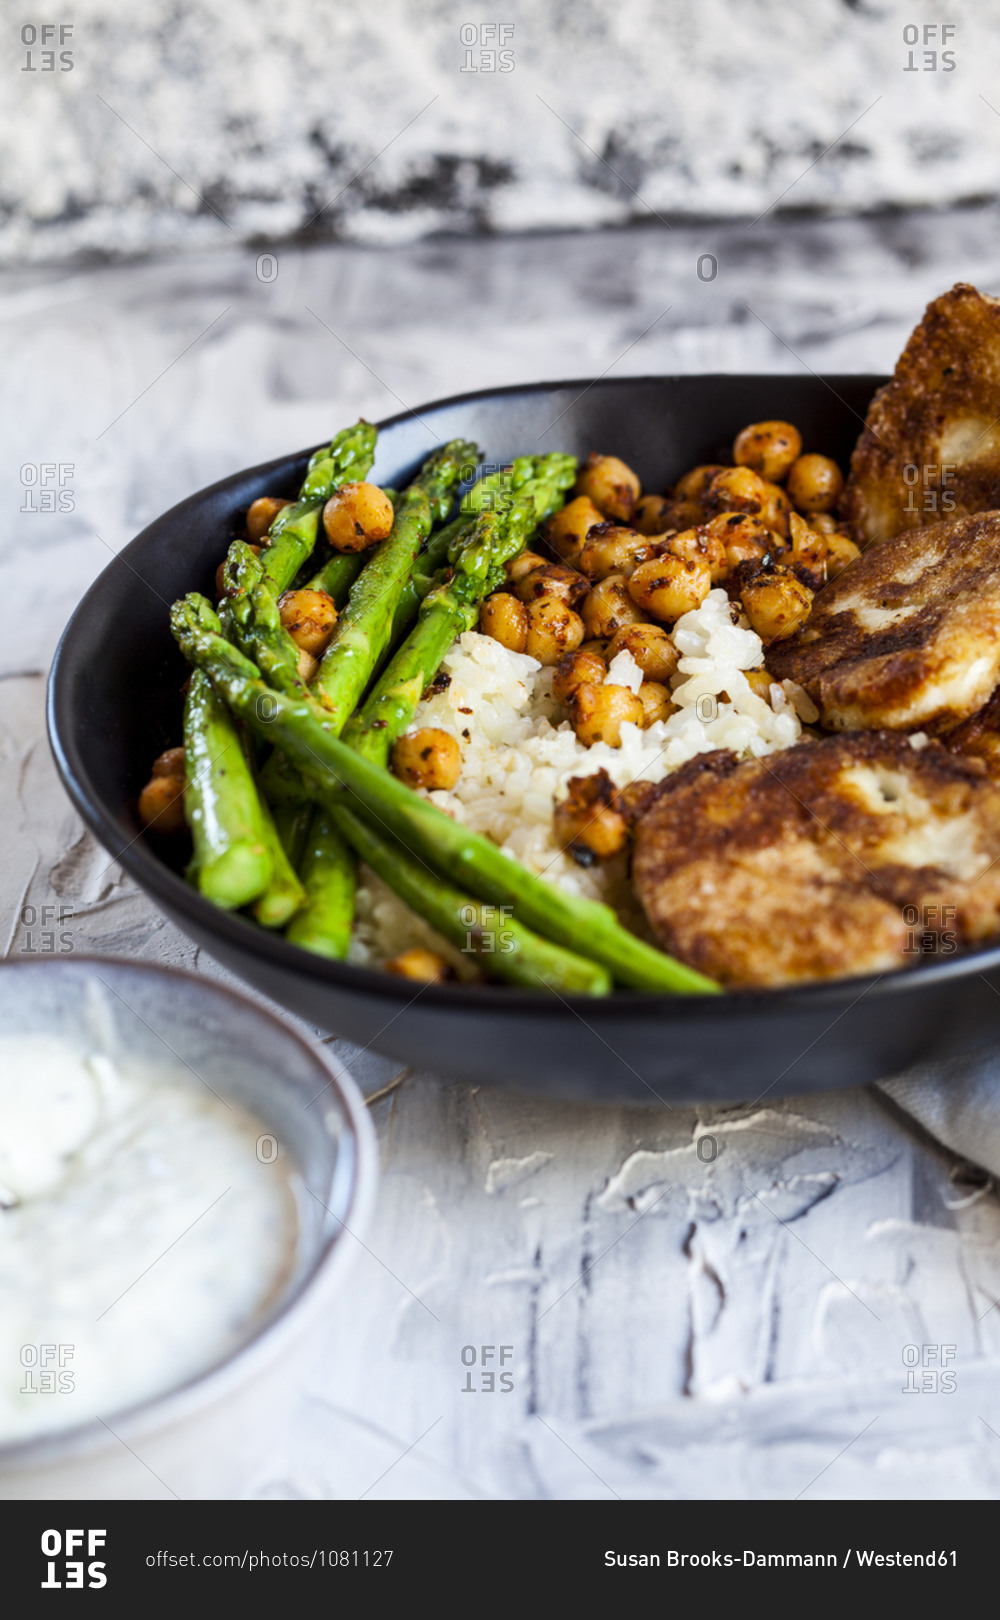 Dipping sauce and bowl of rice with chick-peas- asparagus stalks and fried halloumi cheese